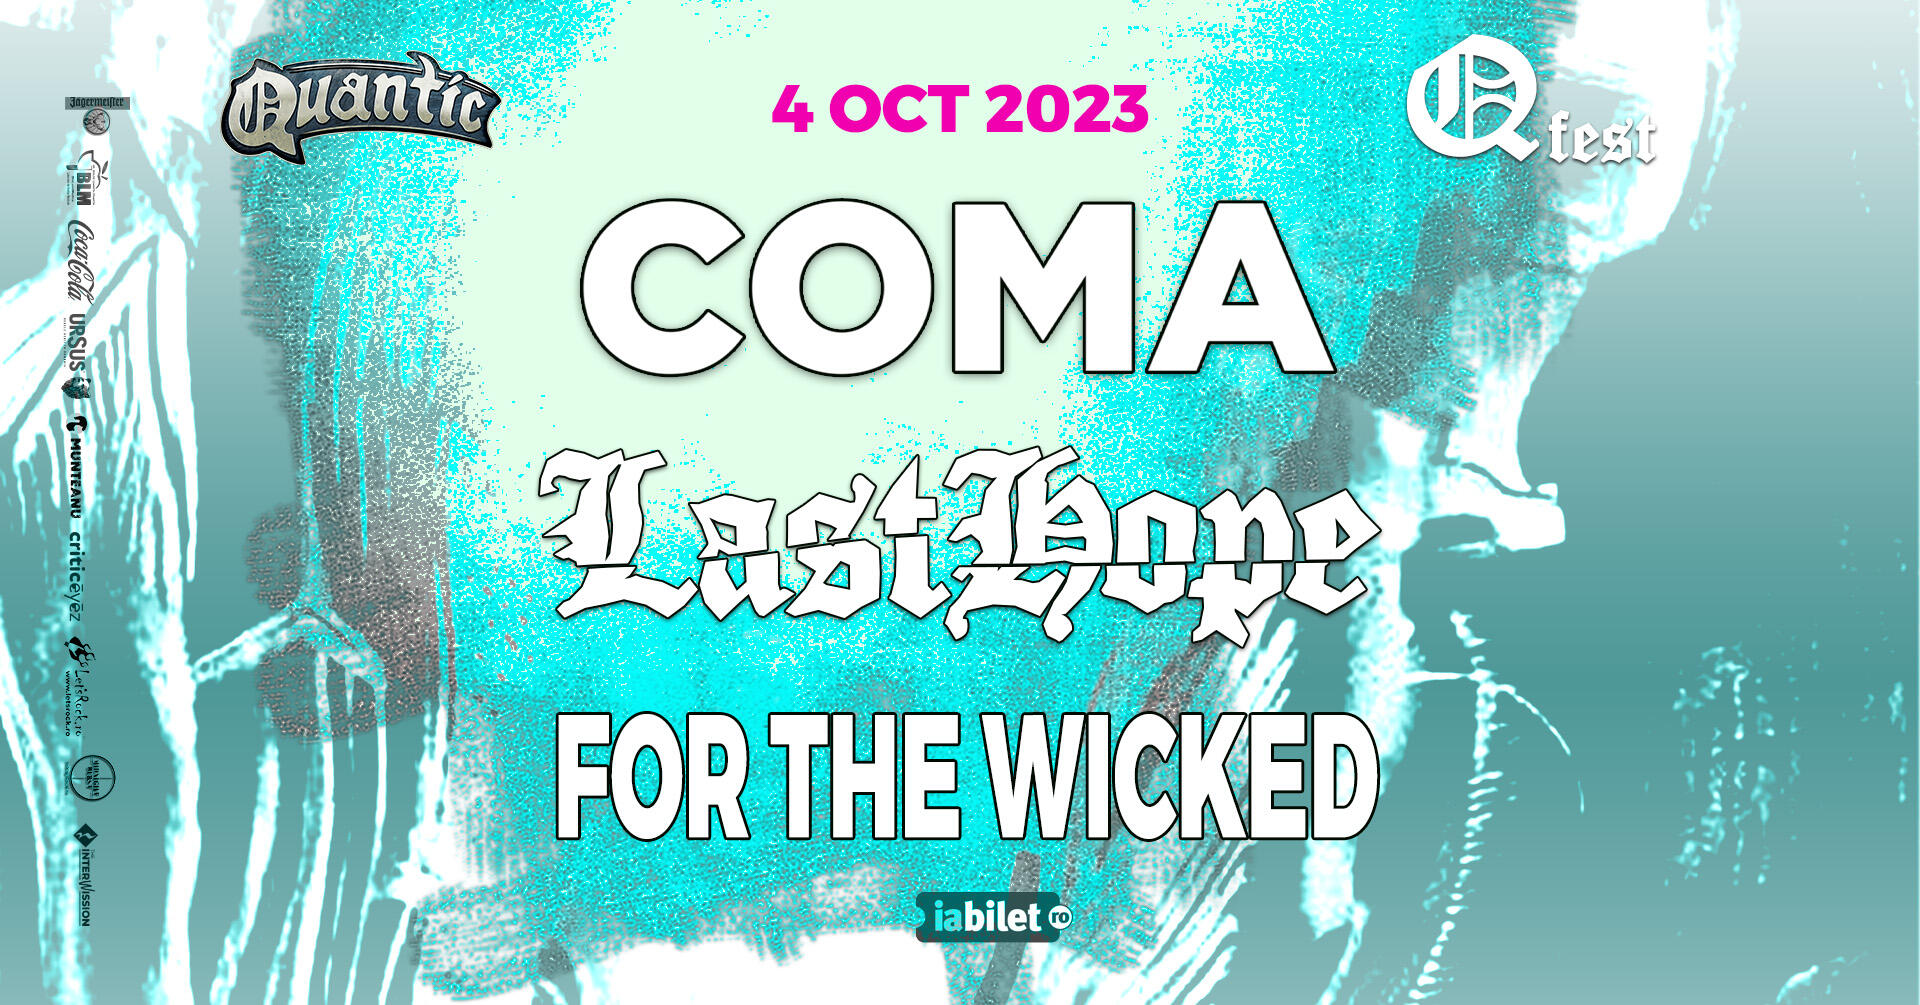 Cronică QFest – Ziua III – Coma, Last Hope, For the Wicked, Quantic, 4 octombrie 2023